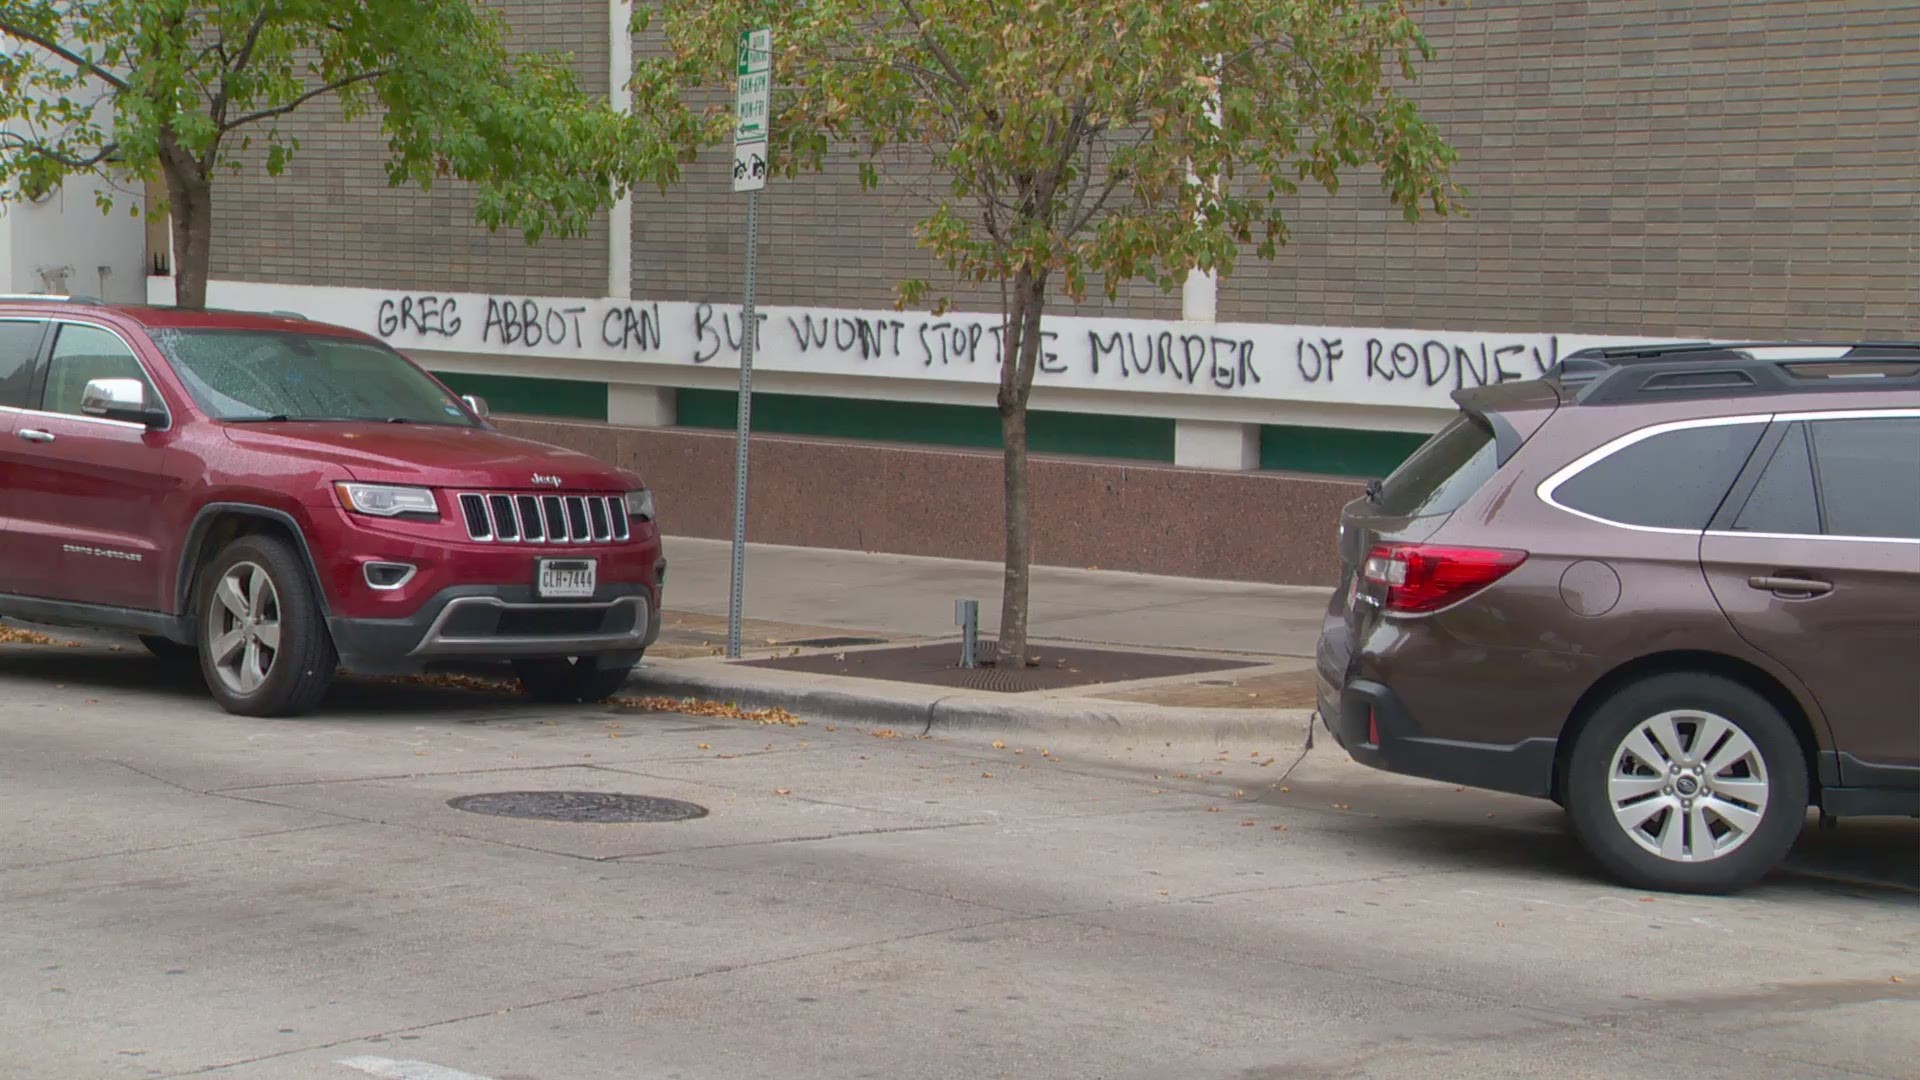 The spray-painted message says, 'Greg Abbott can but won't stop the murder of Rodney Reed.'